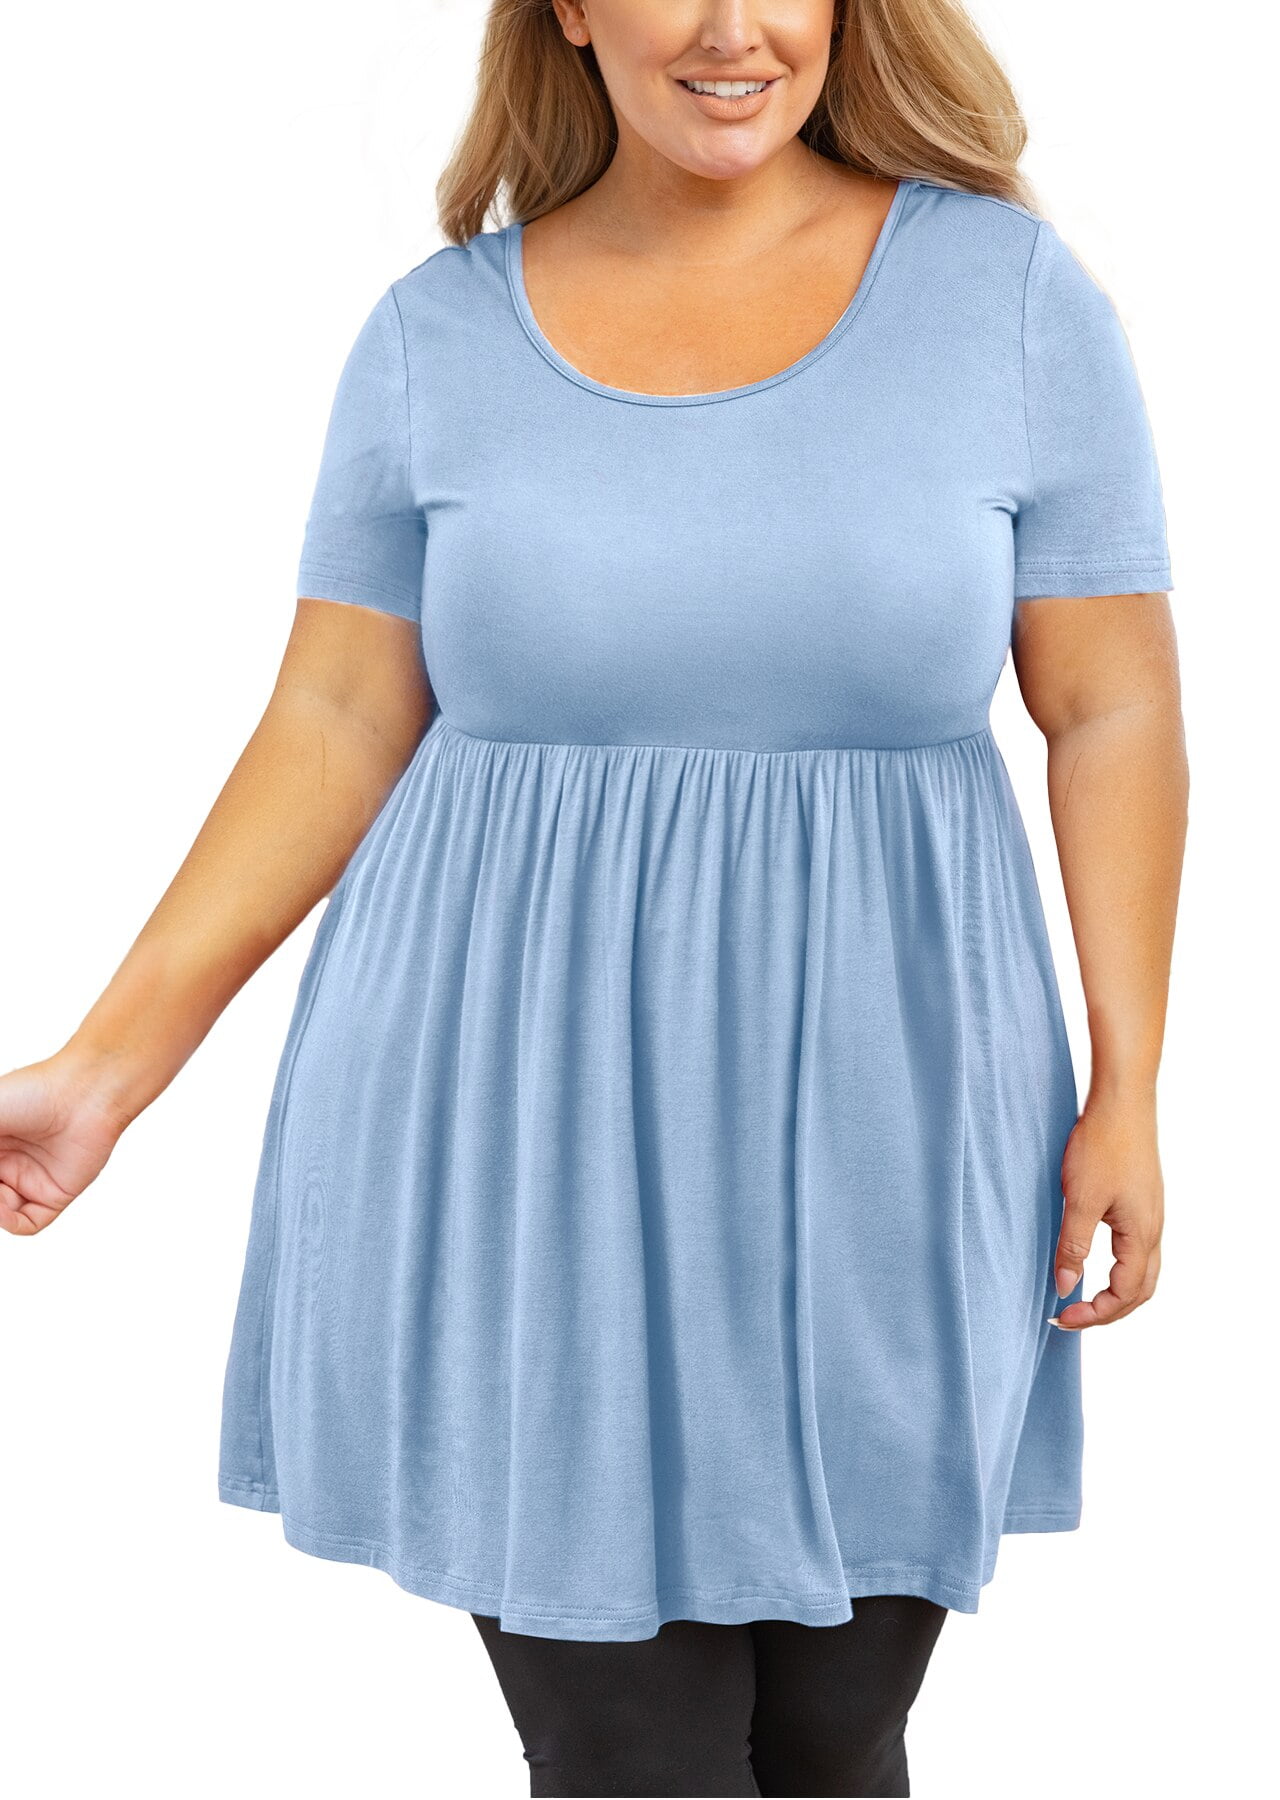 SHOWMALL Plus Size Clothes for Women Short Sleeve Light Blue 4X Crewneck  Summer Tunic Dress Pleated Flowy Maternity Loose Fit Babydoll T Shirt 